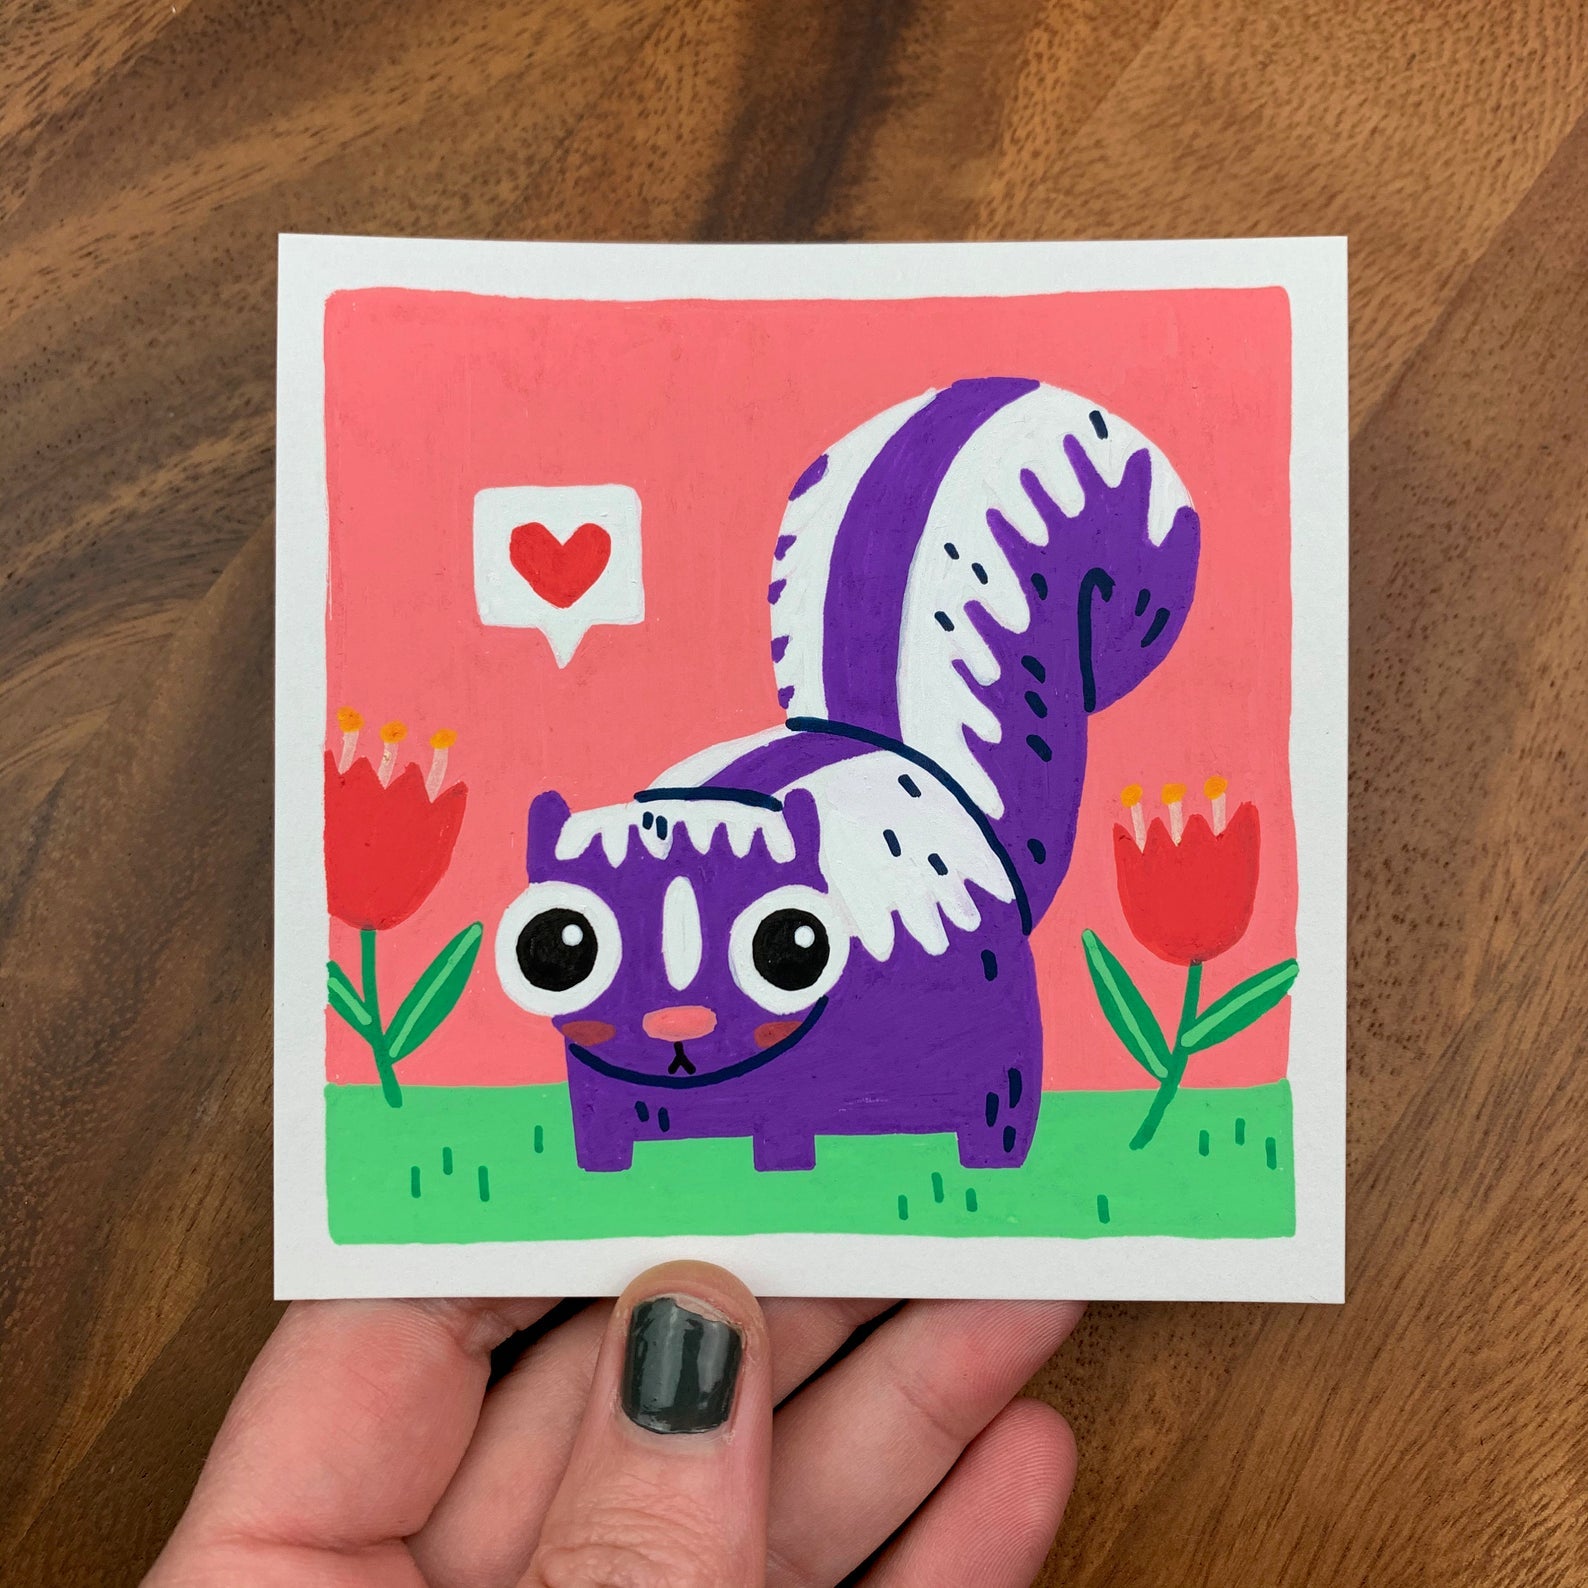 Original artwork of a cute purple skunk in a tulip field with a heart inside a speech bubble. Materials used: Uni-Posca paint markers.